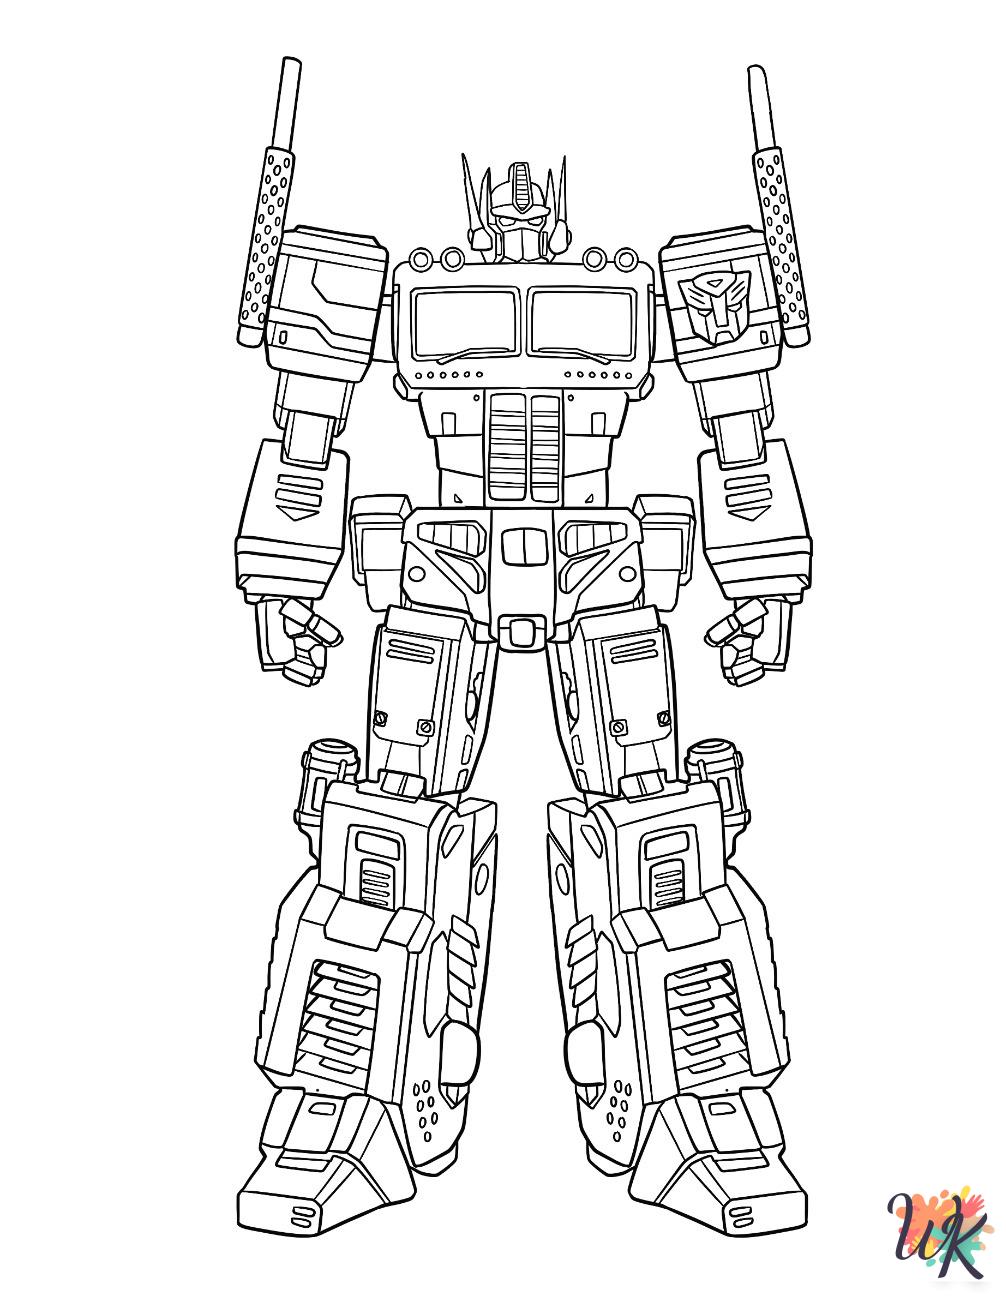 Optimus Prime coloring pages to print